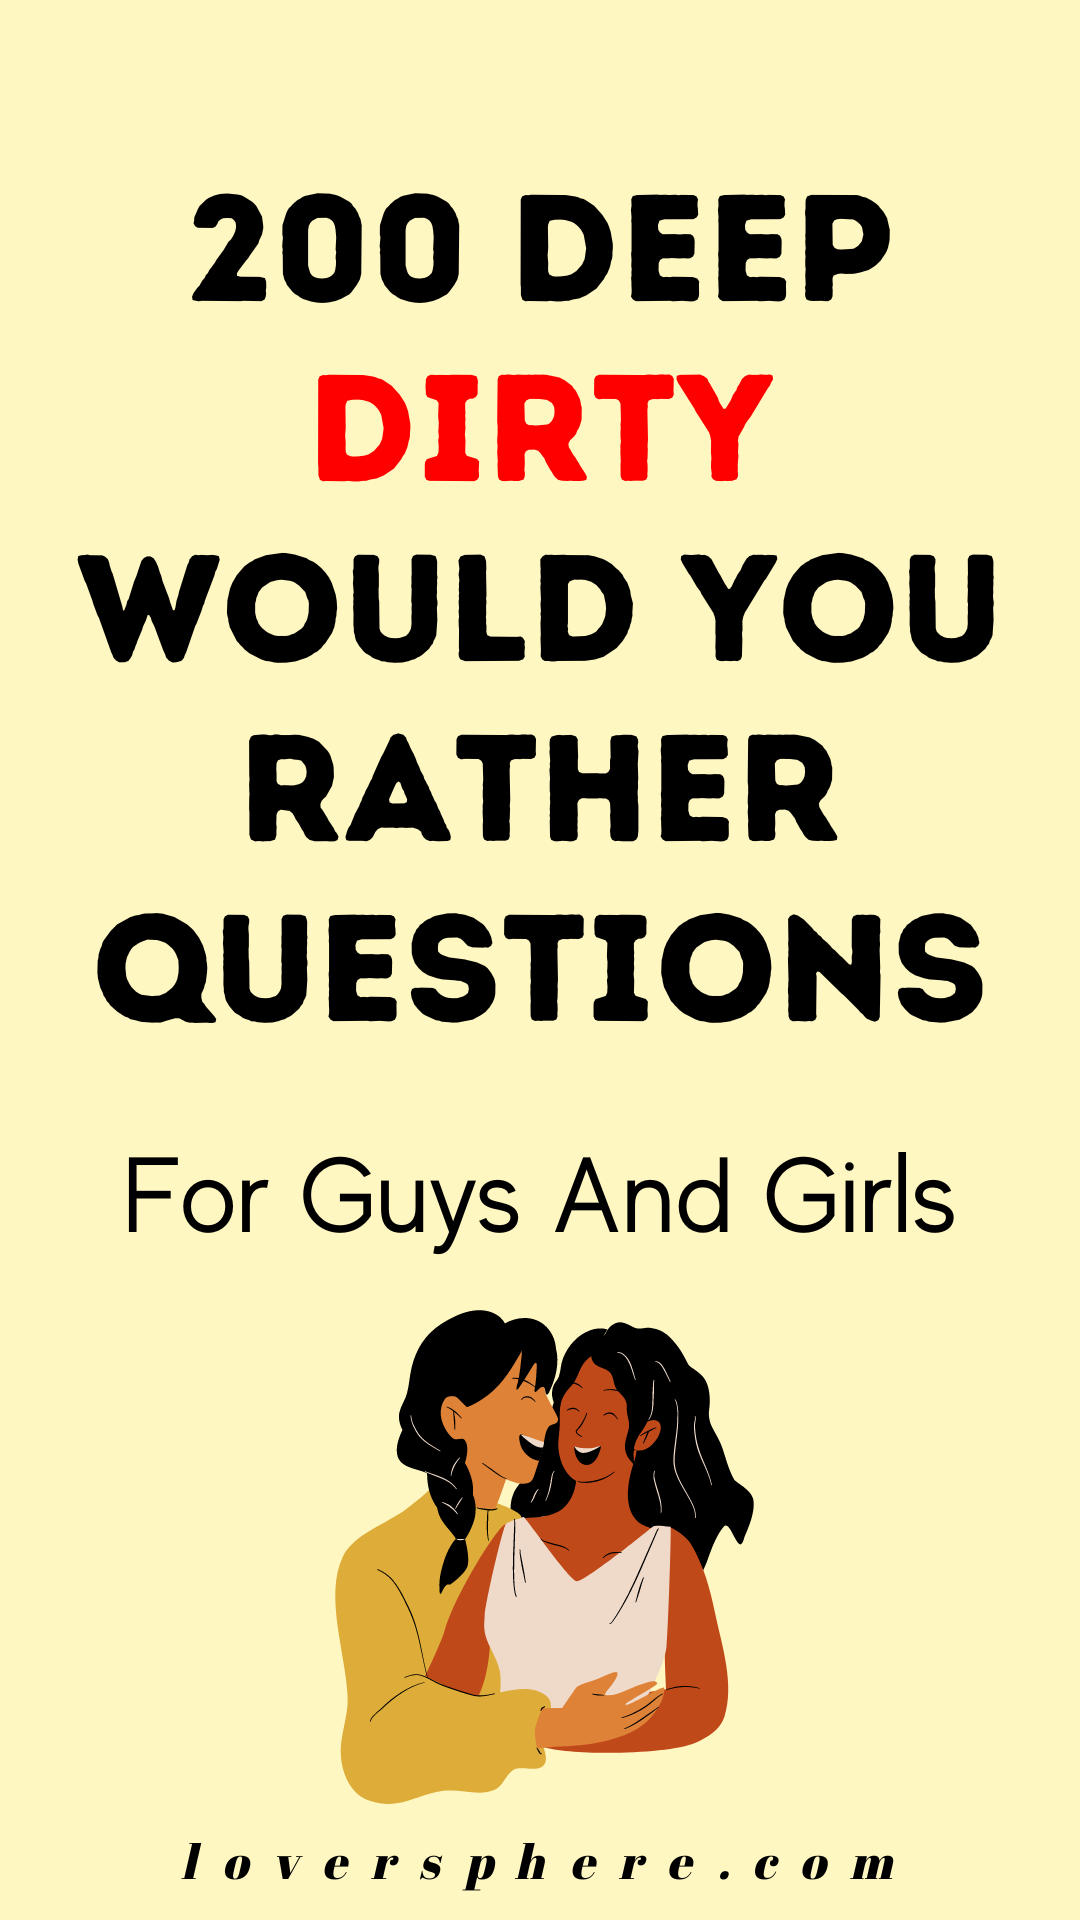 flirty would you rather questions